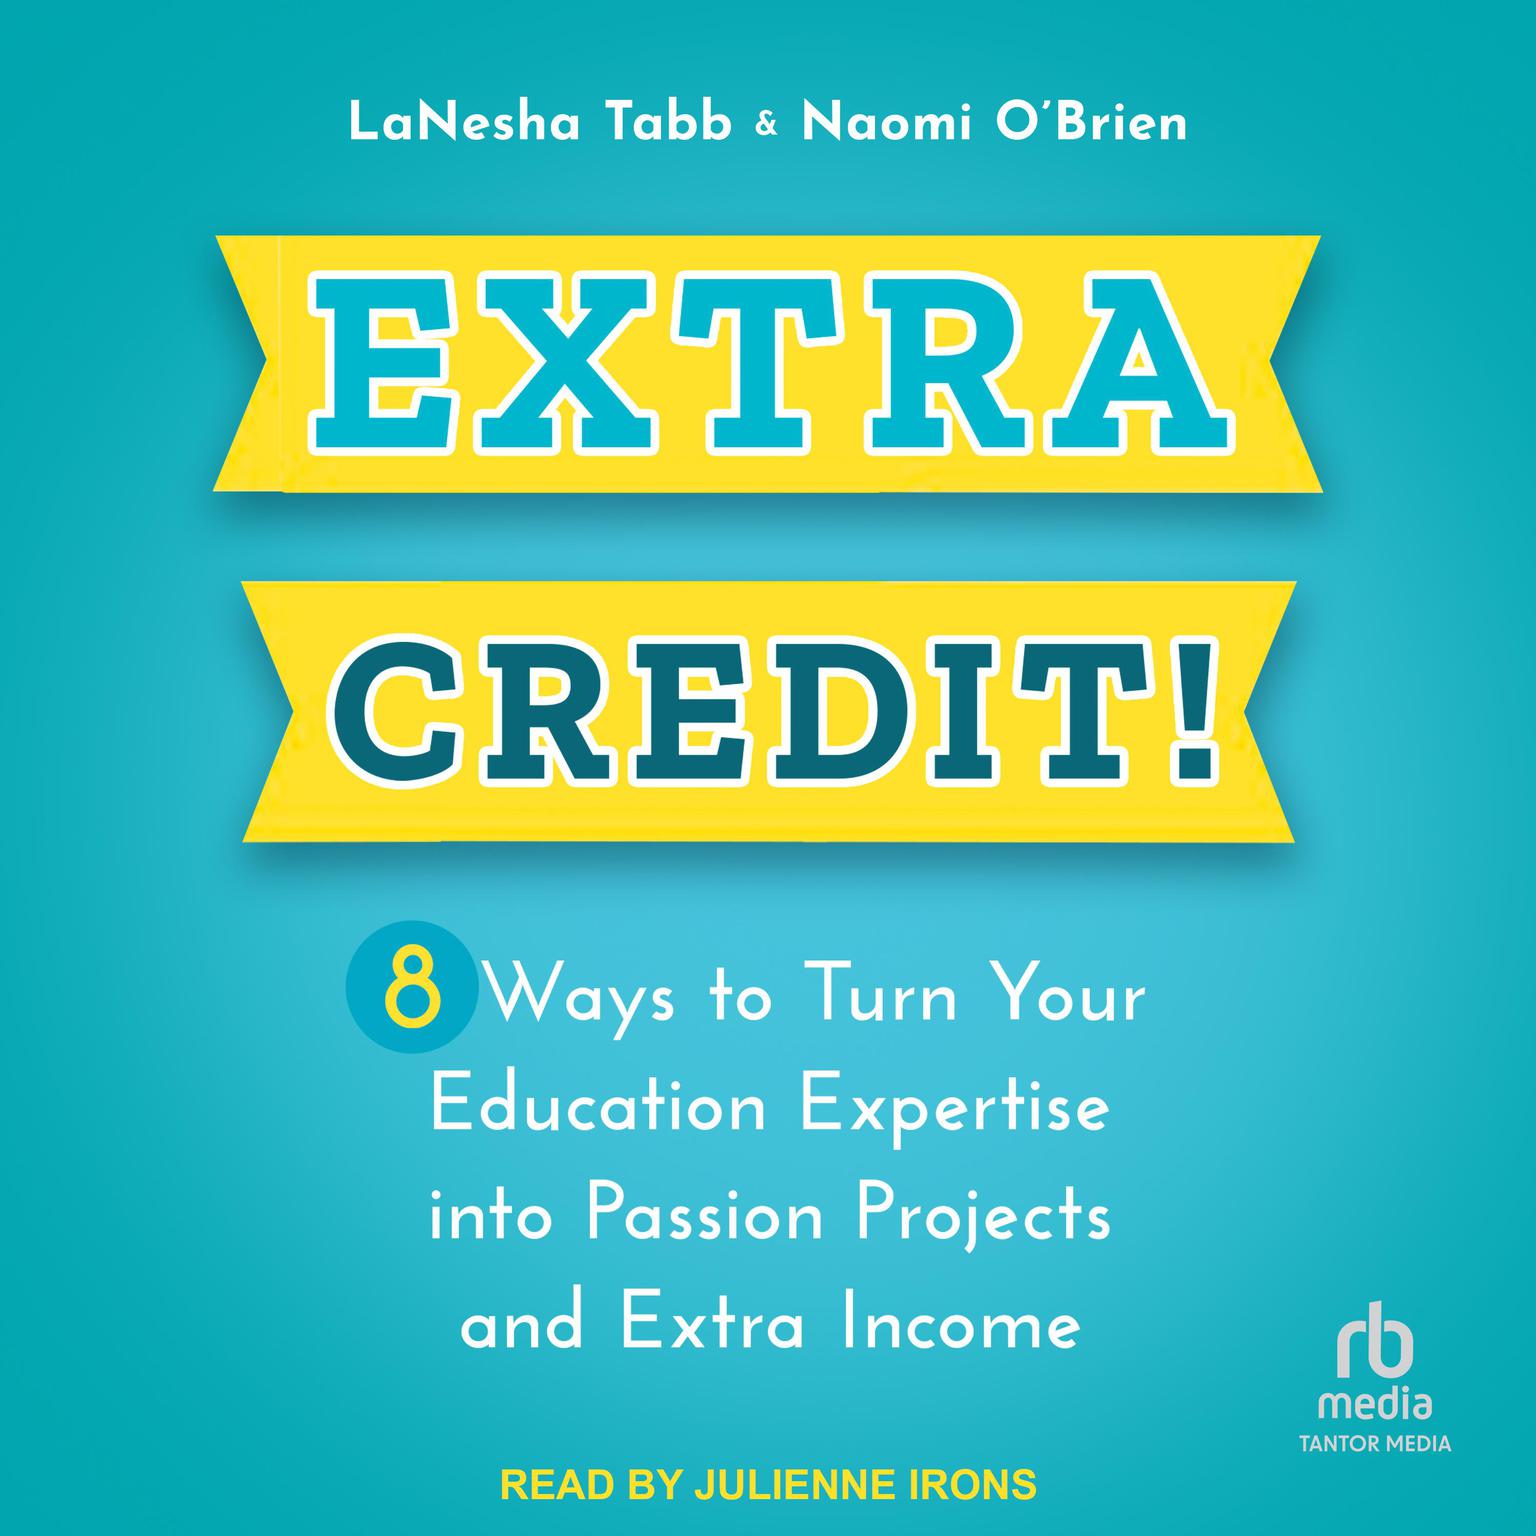 Extra Credit!: 8 Ways to Turn Your Education Expertise into Passion Projects and Extra Income Audiobook, by LaNesha Tabb